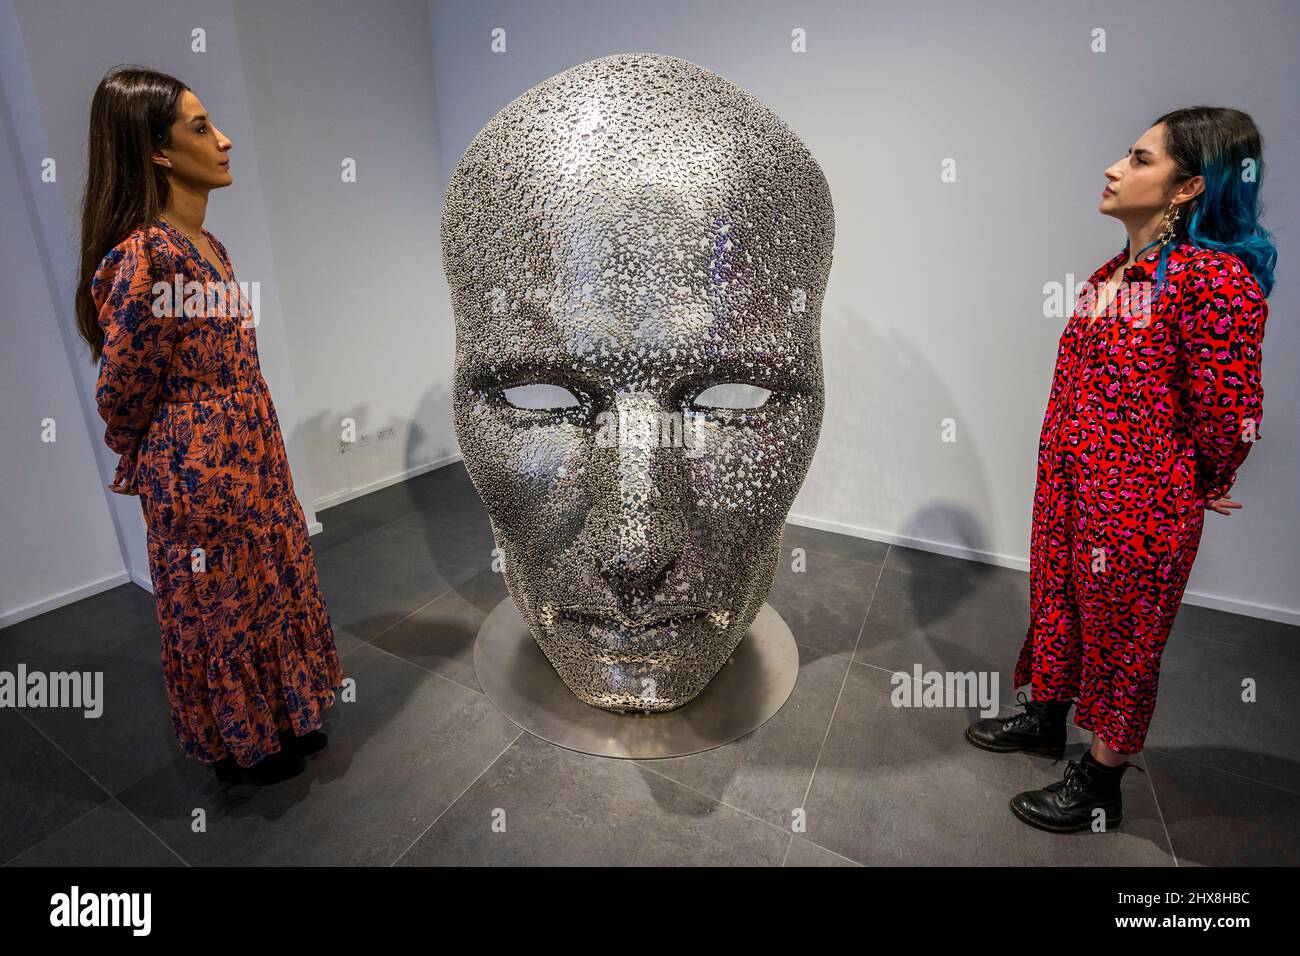 London, UK. 10th Mar, 2022. Korean Art - Cultivating the Unexpected, a group show tat Opera Gallery, New Bond Street. It brings together five Korean contemporary artists: Cho Sung-Hee, Chun Kwan-Young, Jae Ko, Yoo Bong Sang and Seo Young-Deok. Credit: Guy Bell/Alamy Live News Stock Photo